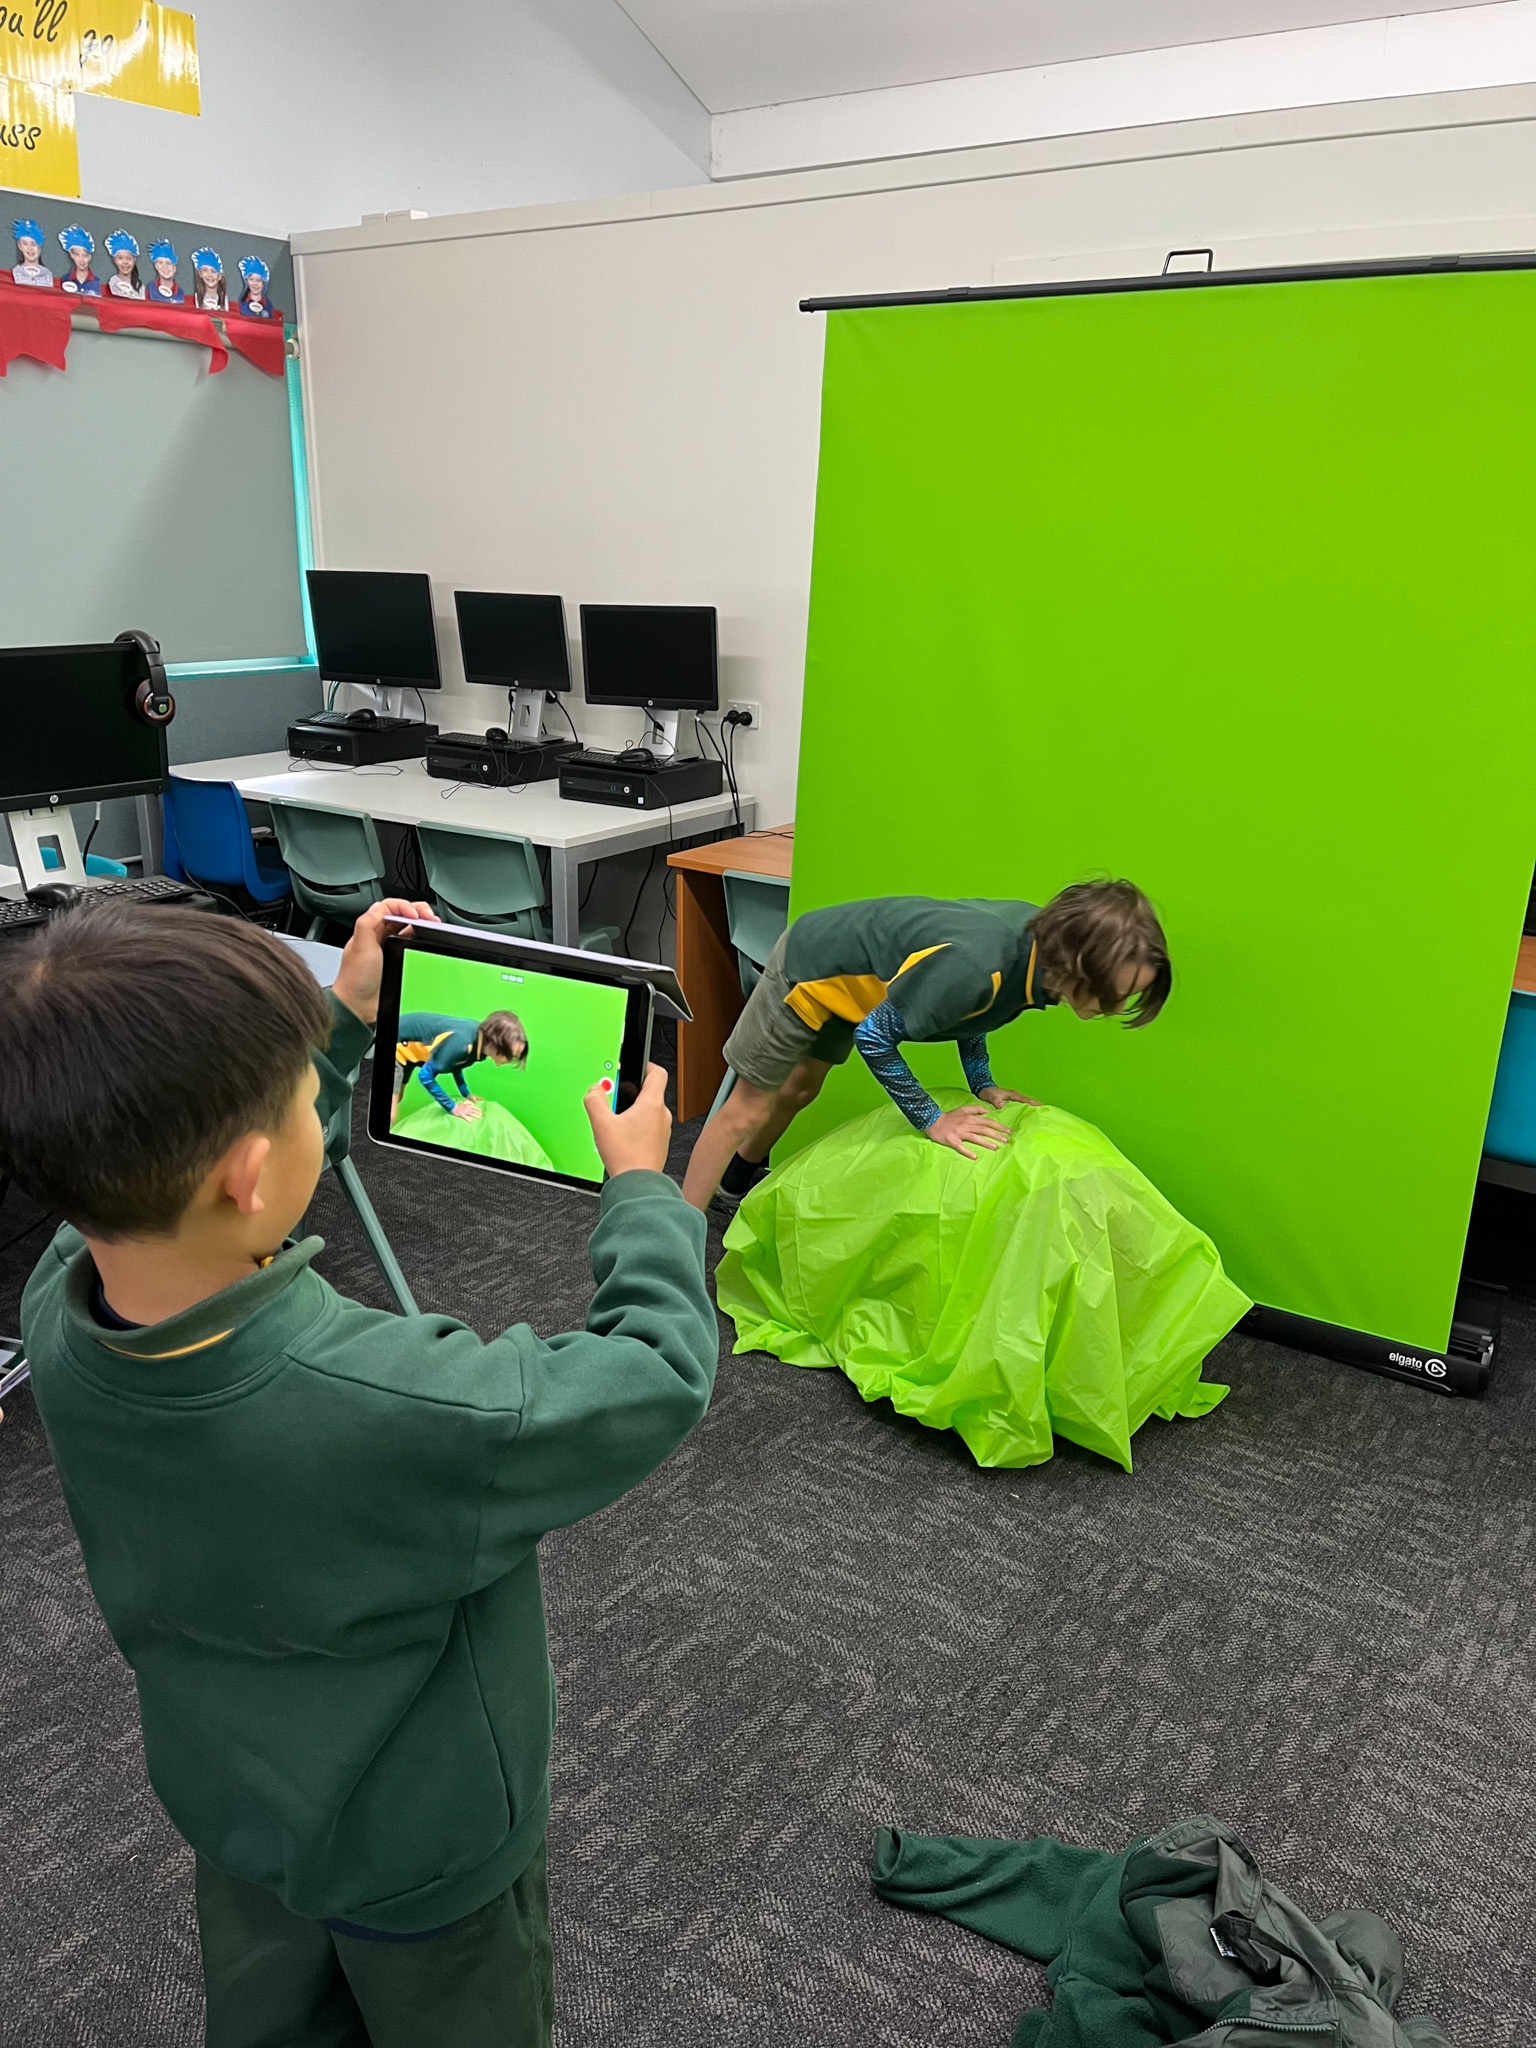 A boy using an iPad to film a scene in front of a green screen.